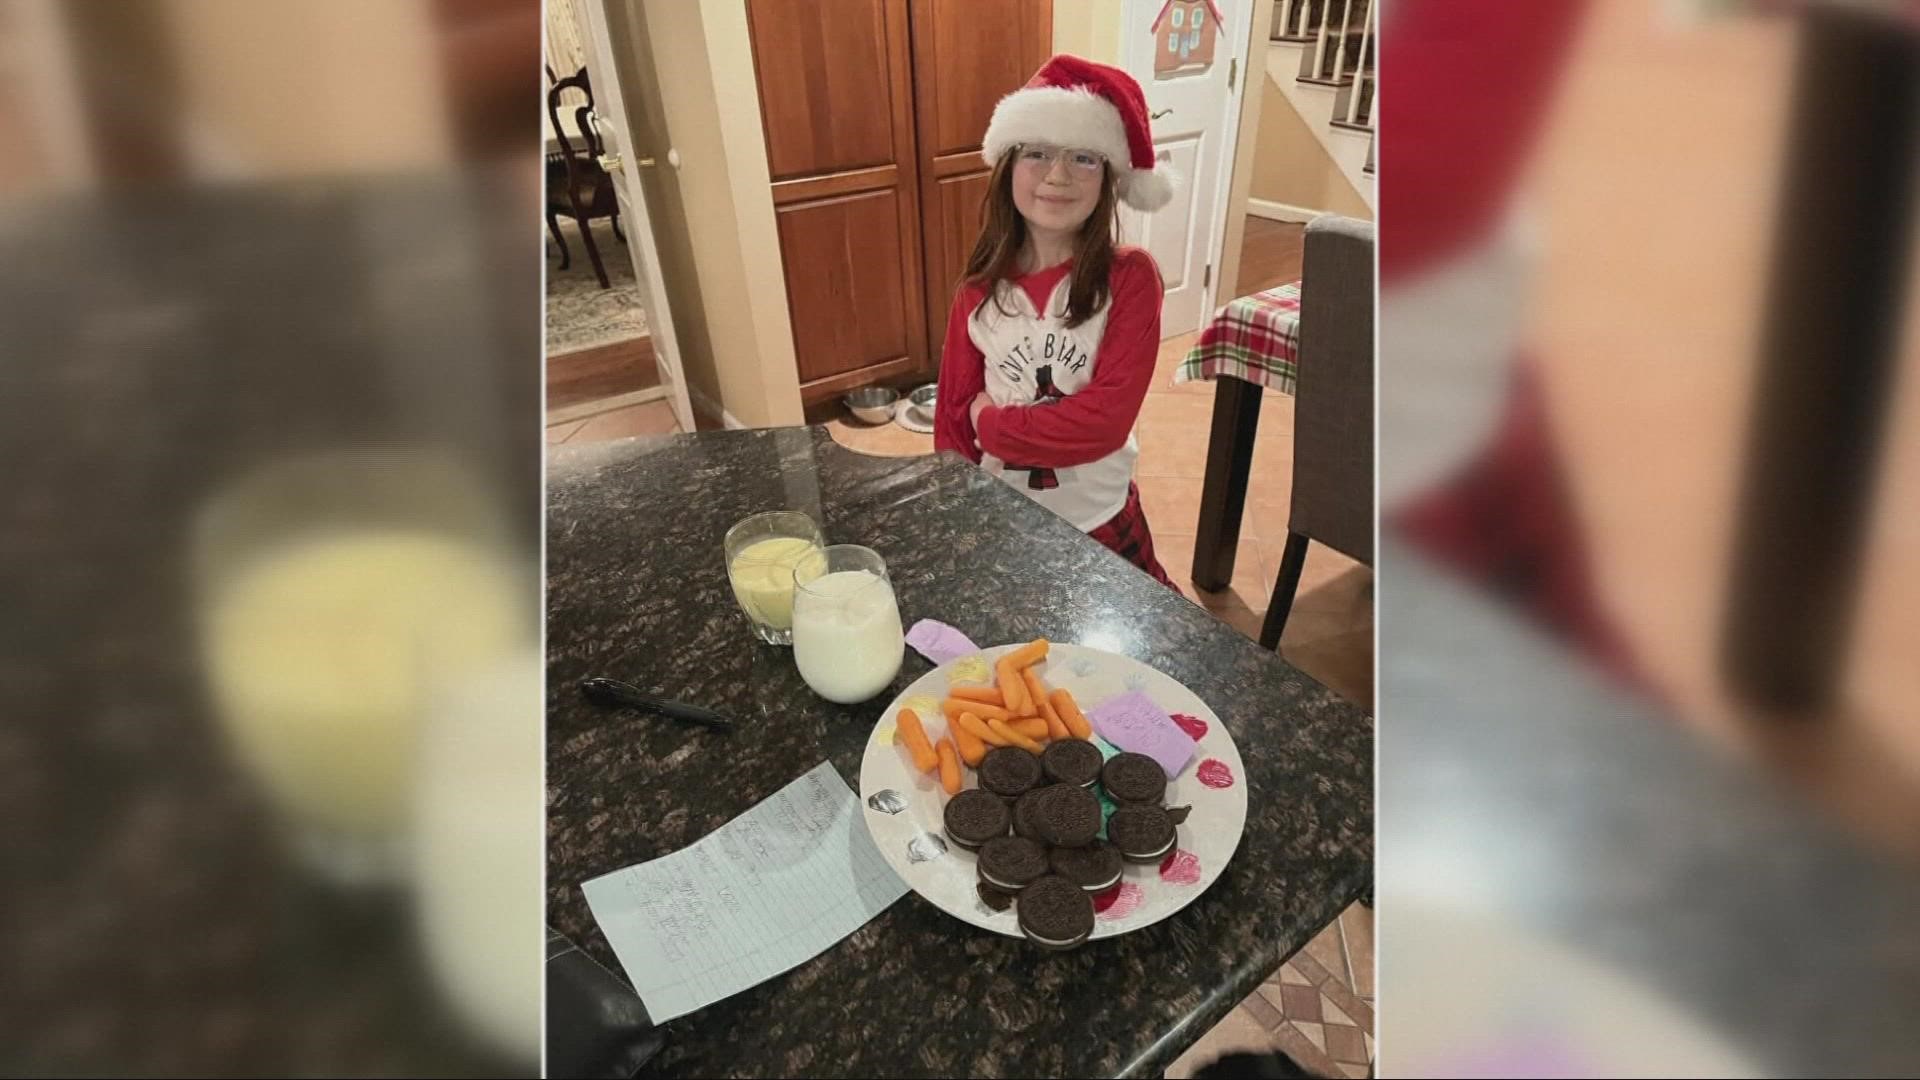 A Rhode Island girl had sent the cookie and carrot sticks to her town’s police department to ask if they can be tested for DNA.